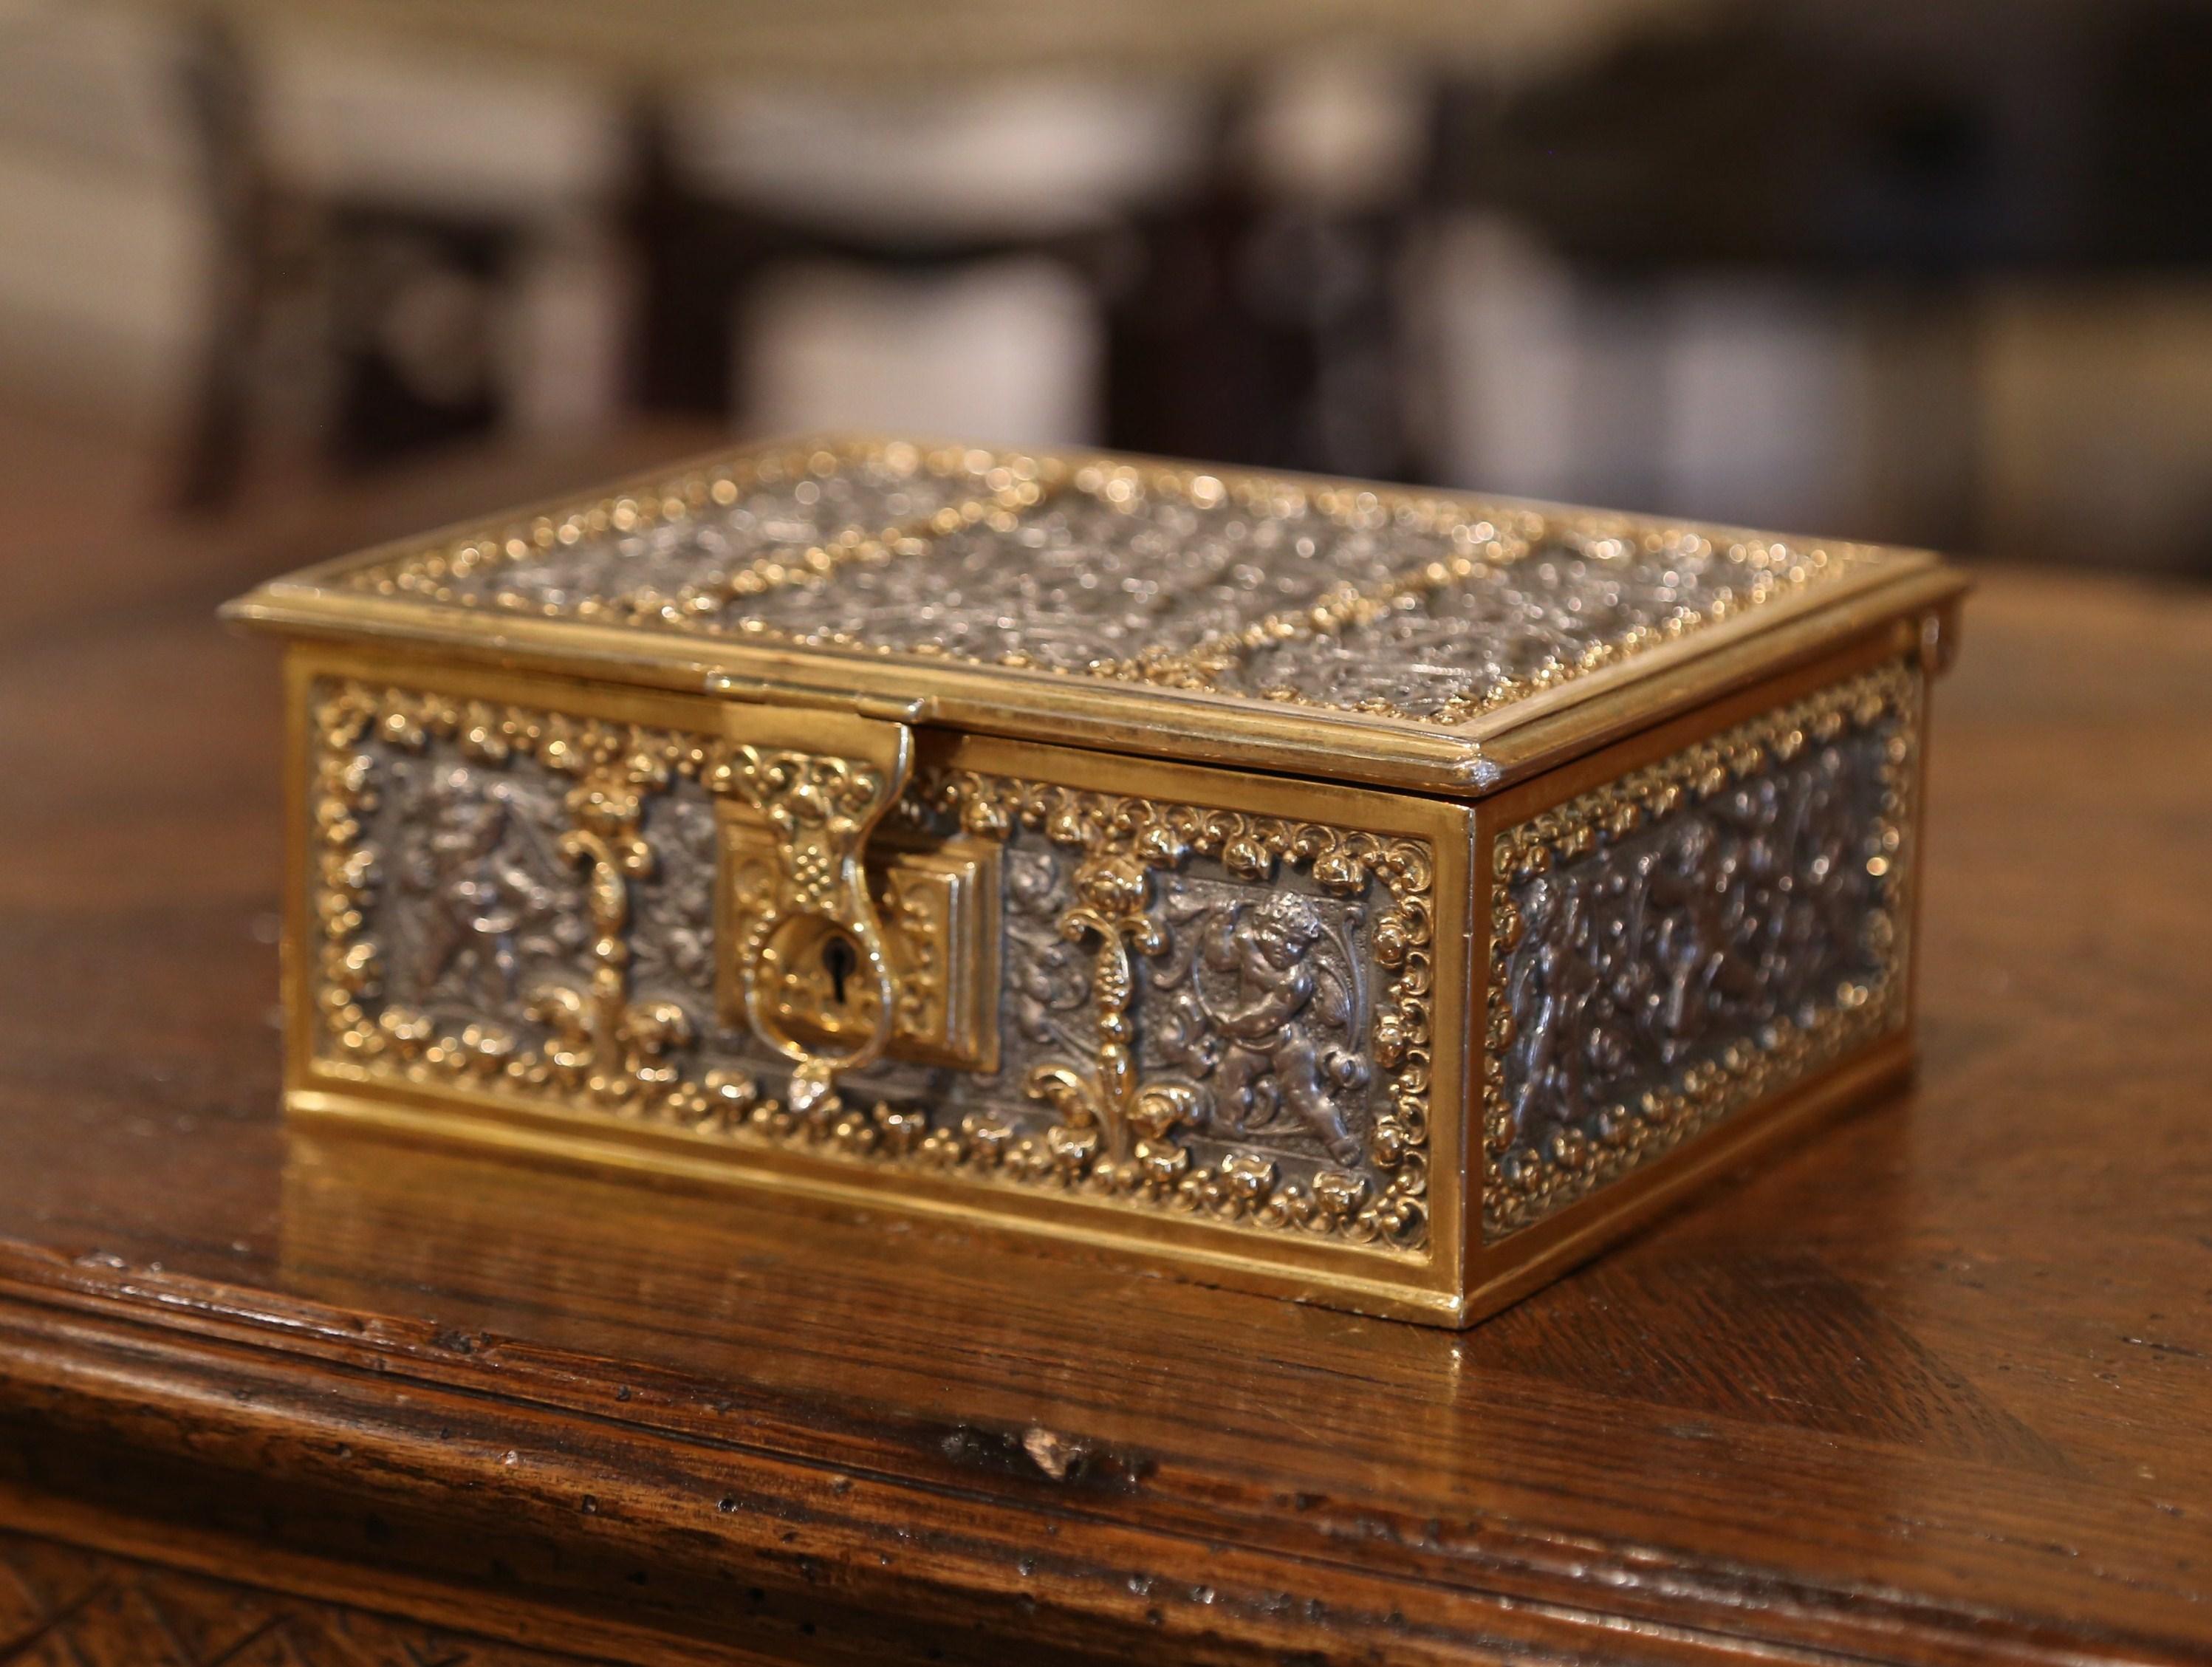 This antique two-tone casket was created in France, circa 1880. Rectangular in shape, the gilt bronze and pewter box is embellished with cherub and scroll motifs. The detail work is outstanding with bas relief decor on all five sides. The inside box